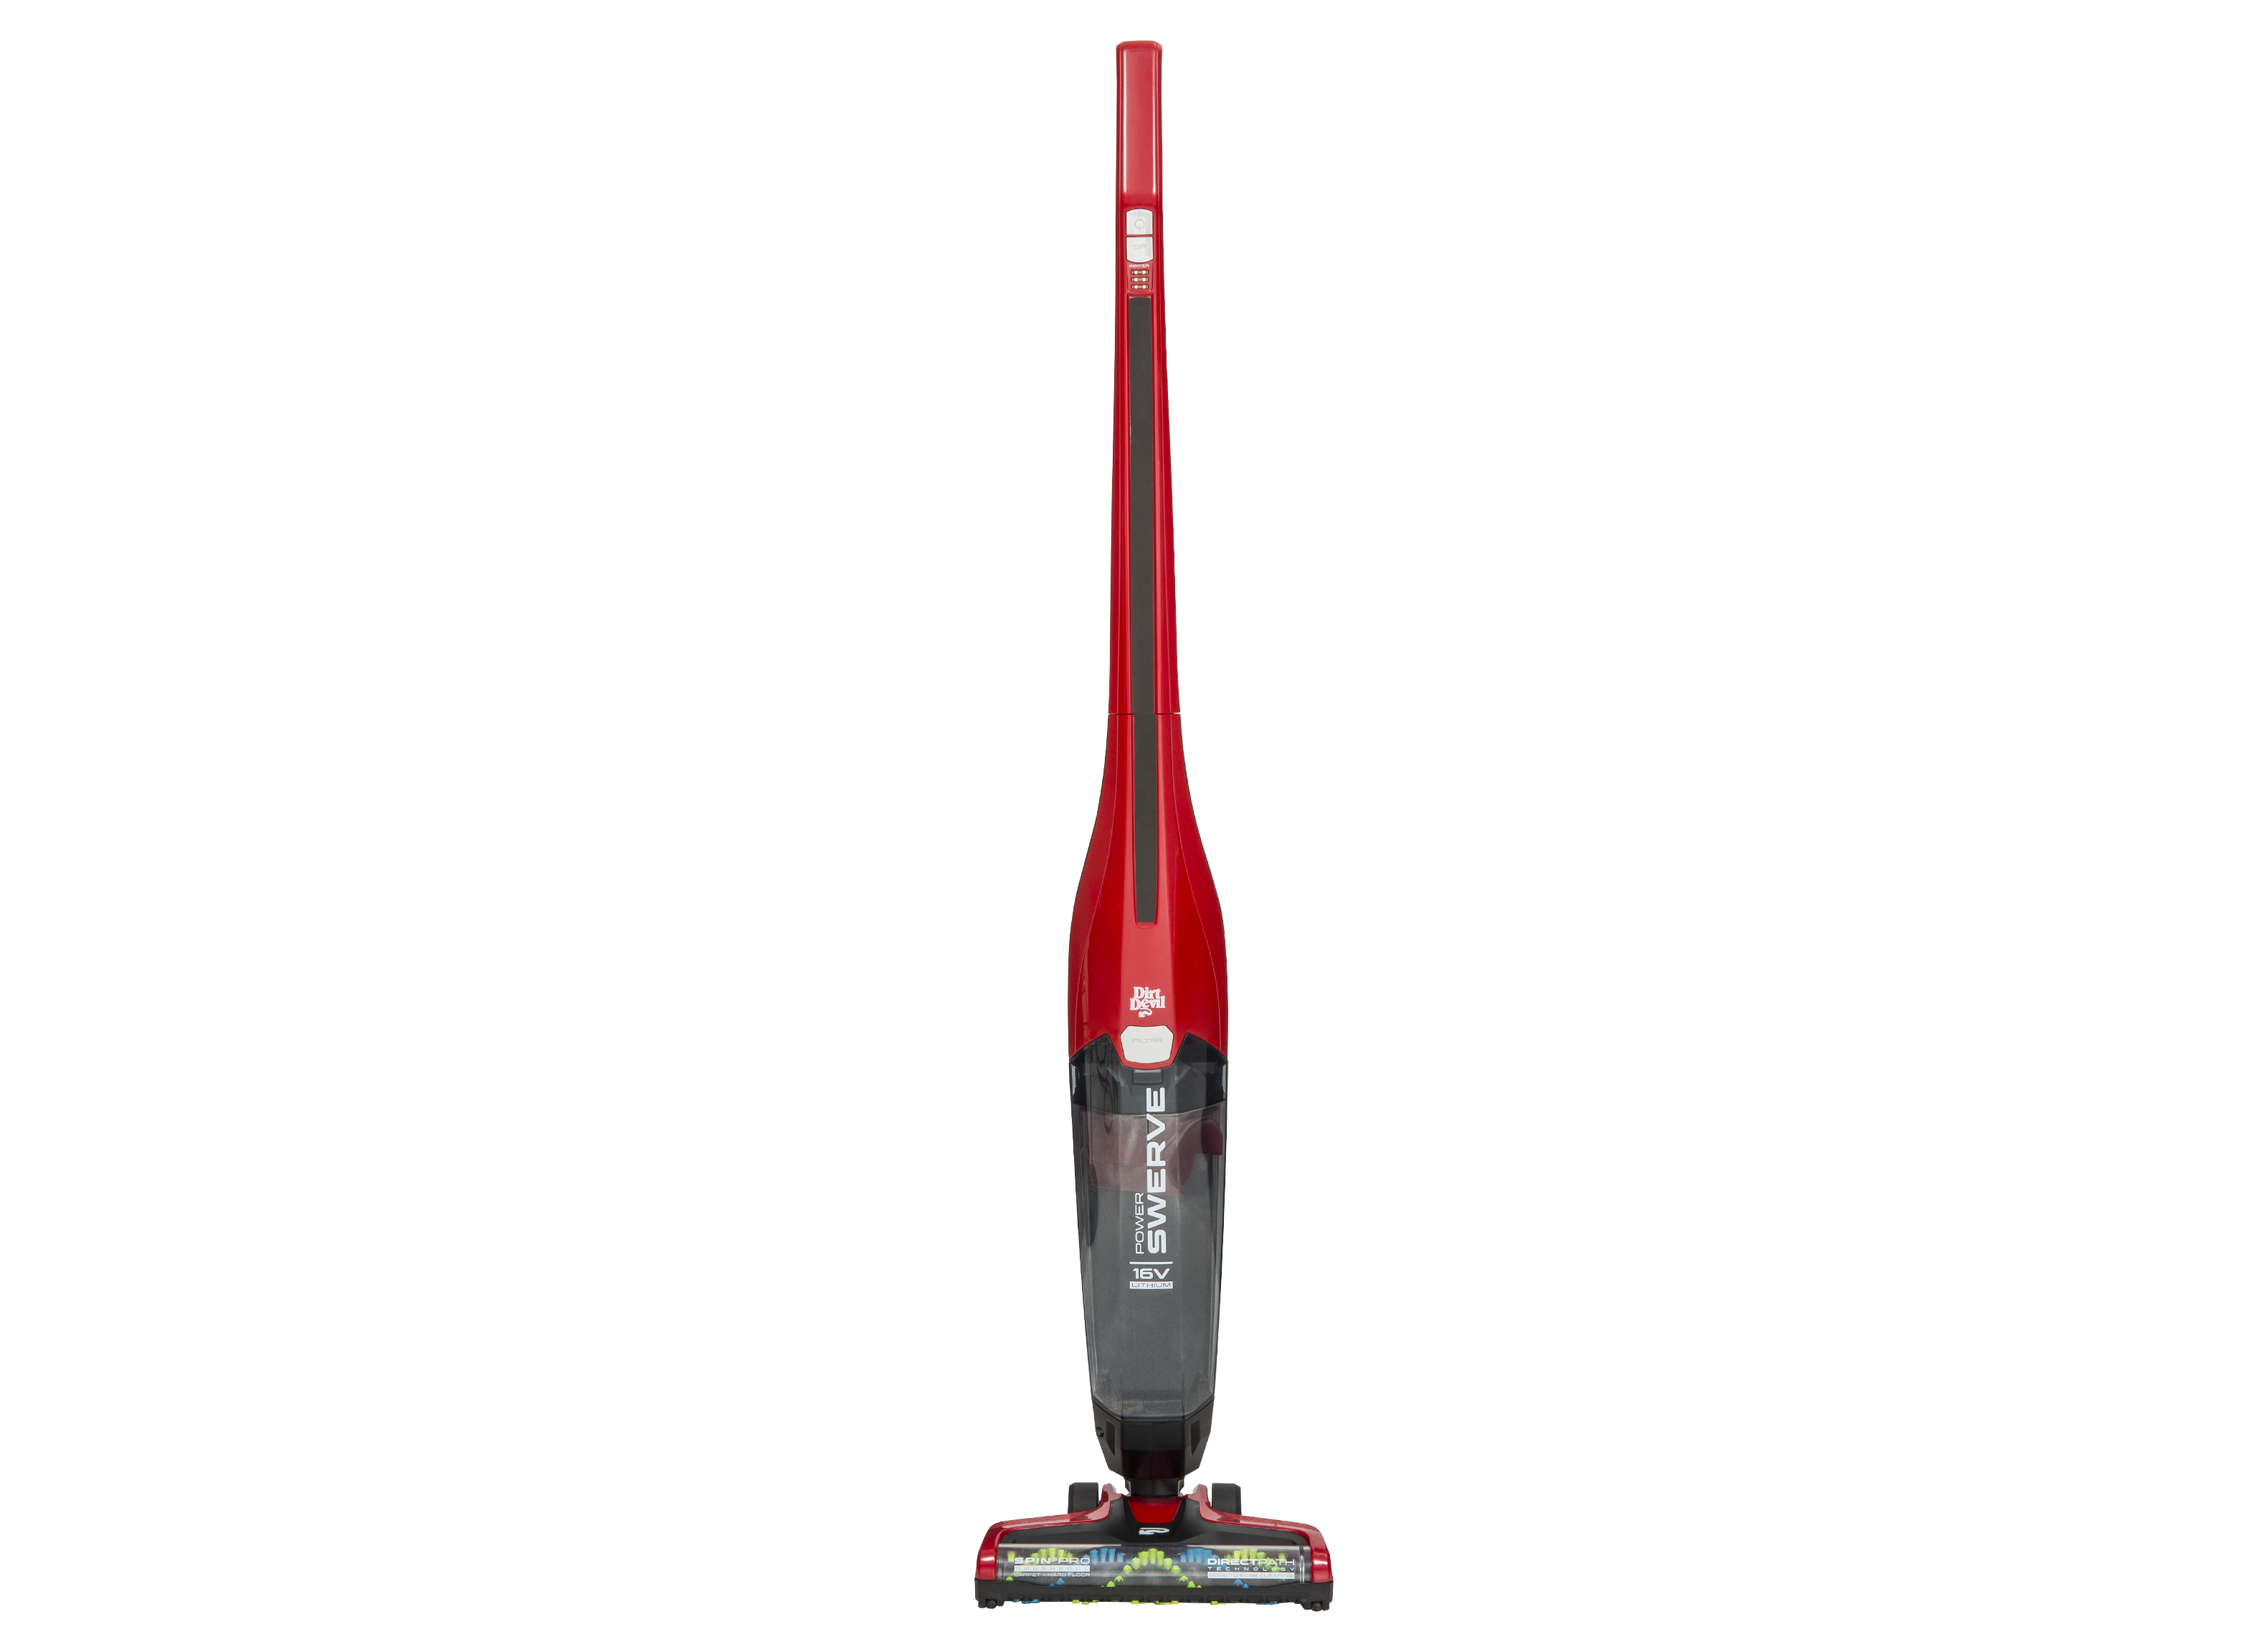 https://crdms.images.consumerreports.org/prod/products/cr/models/392427-stickvacuums-dirtdevil-powerswervebd22050.png